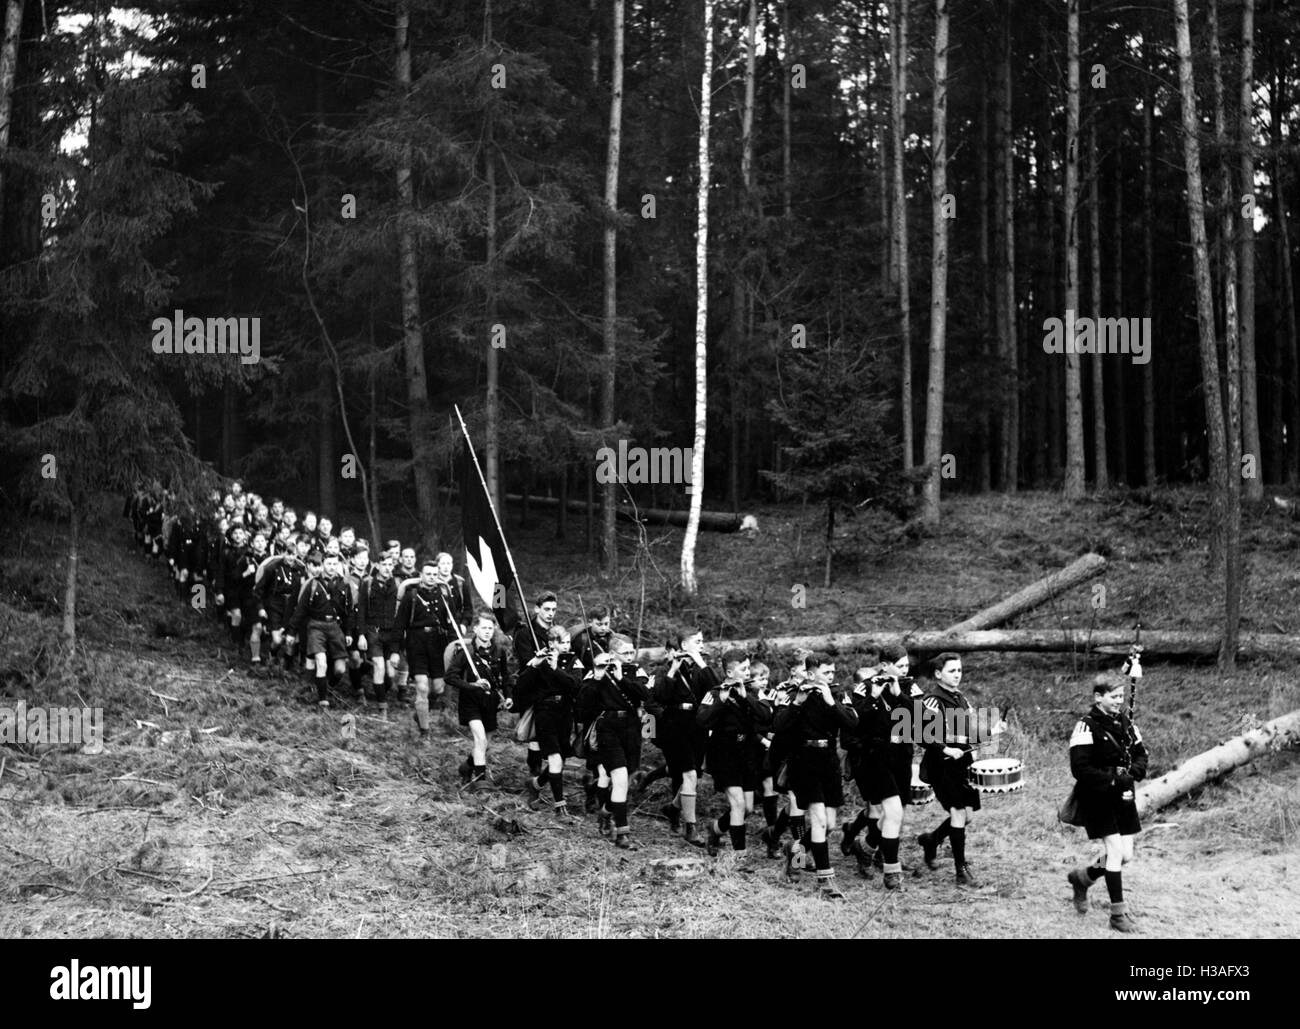 Members of the Deutsches Jungvolk on the march, 1934 Stock Photo